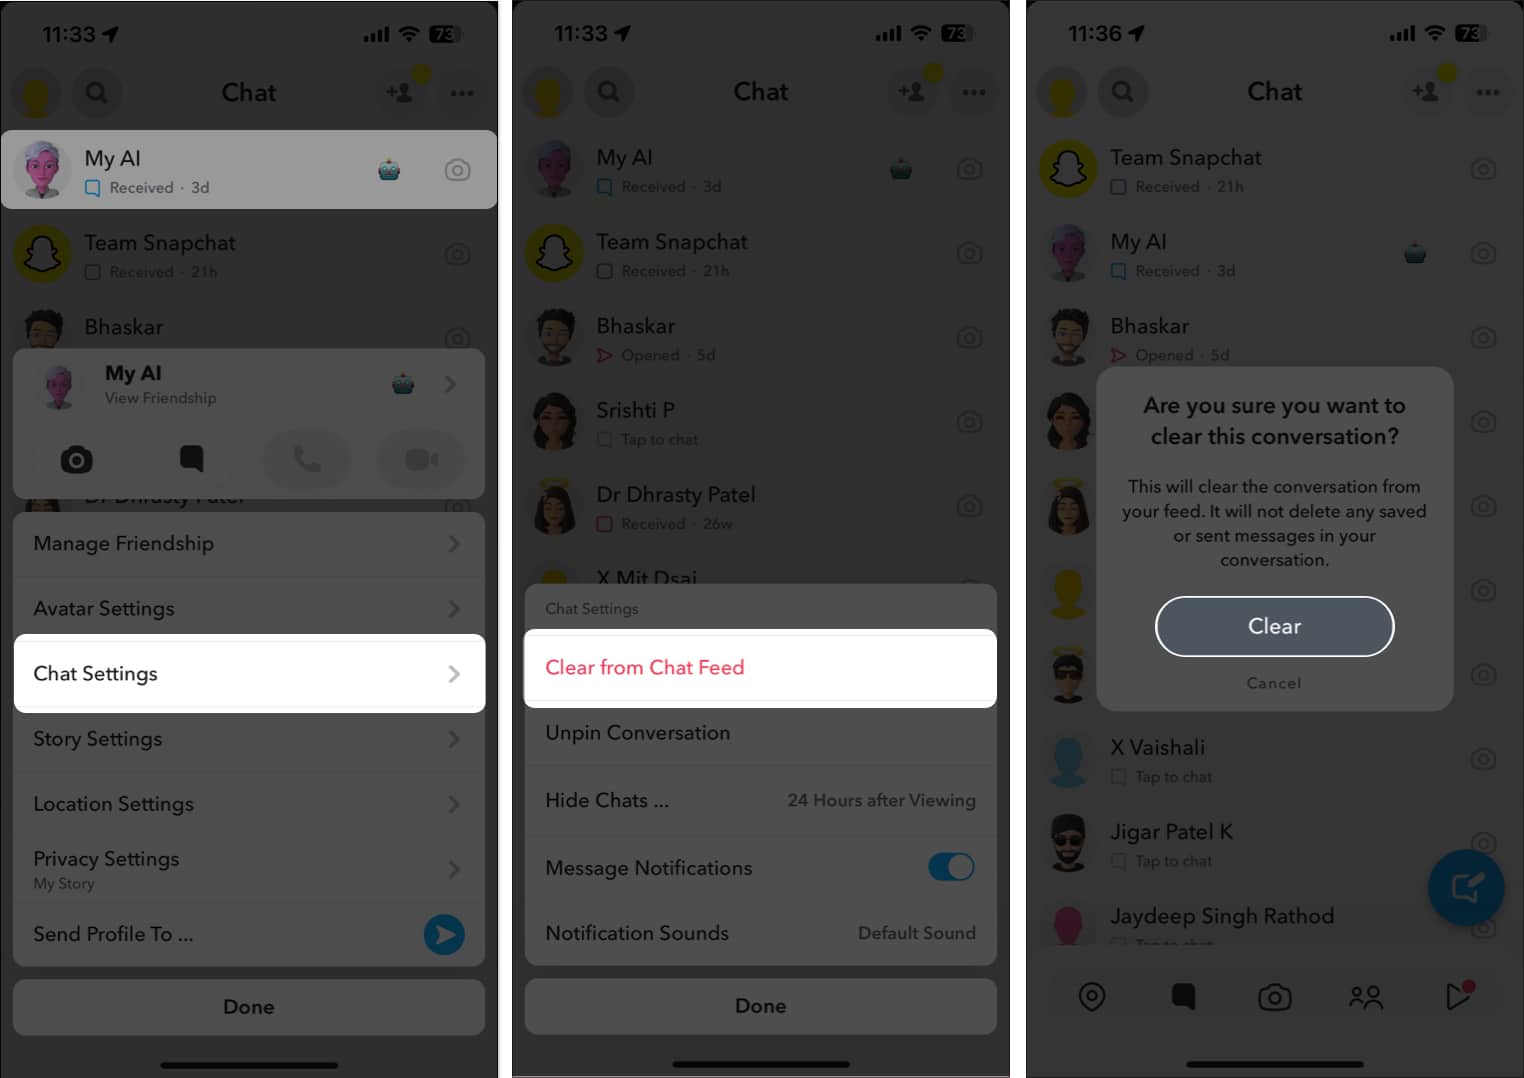 Press and hold the My AI chat, select Chat Settings, choose Clear from Chat Feed, and hit the Clear button